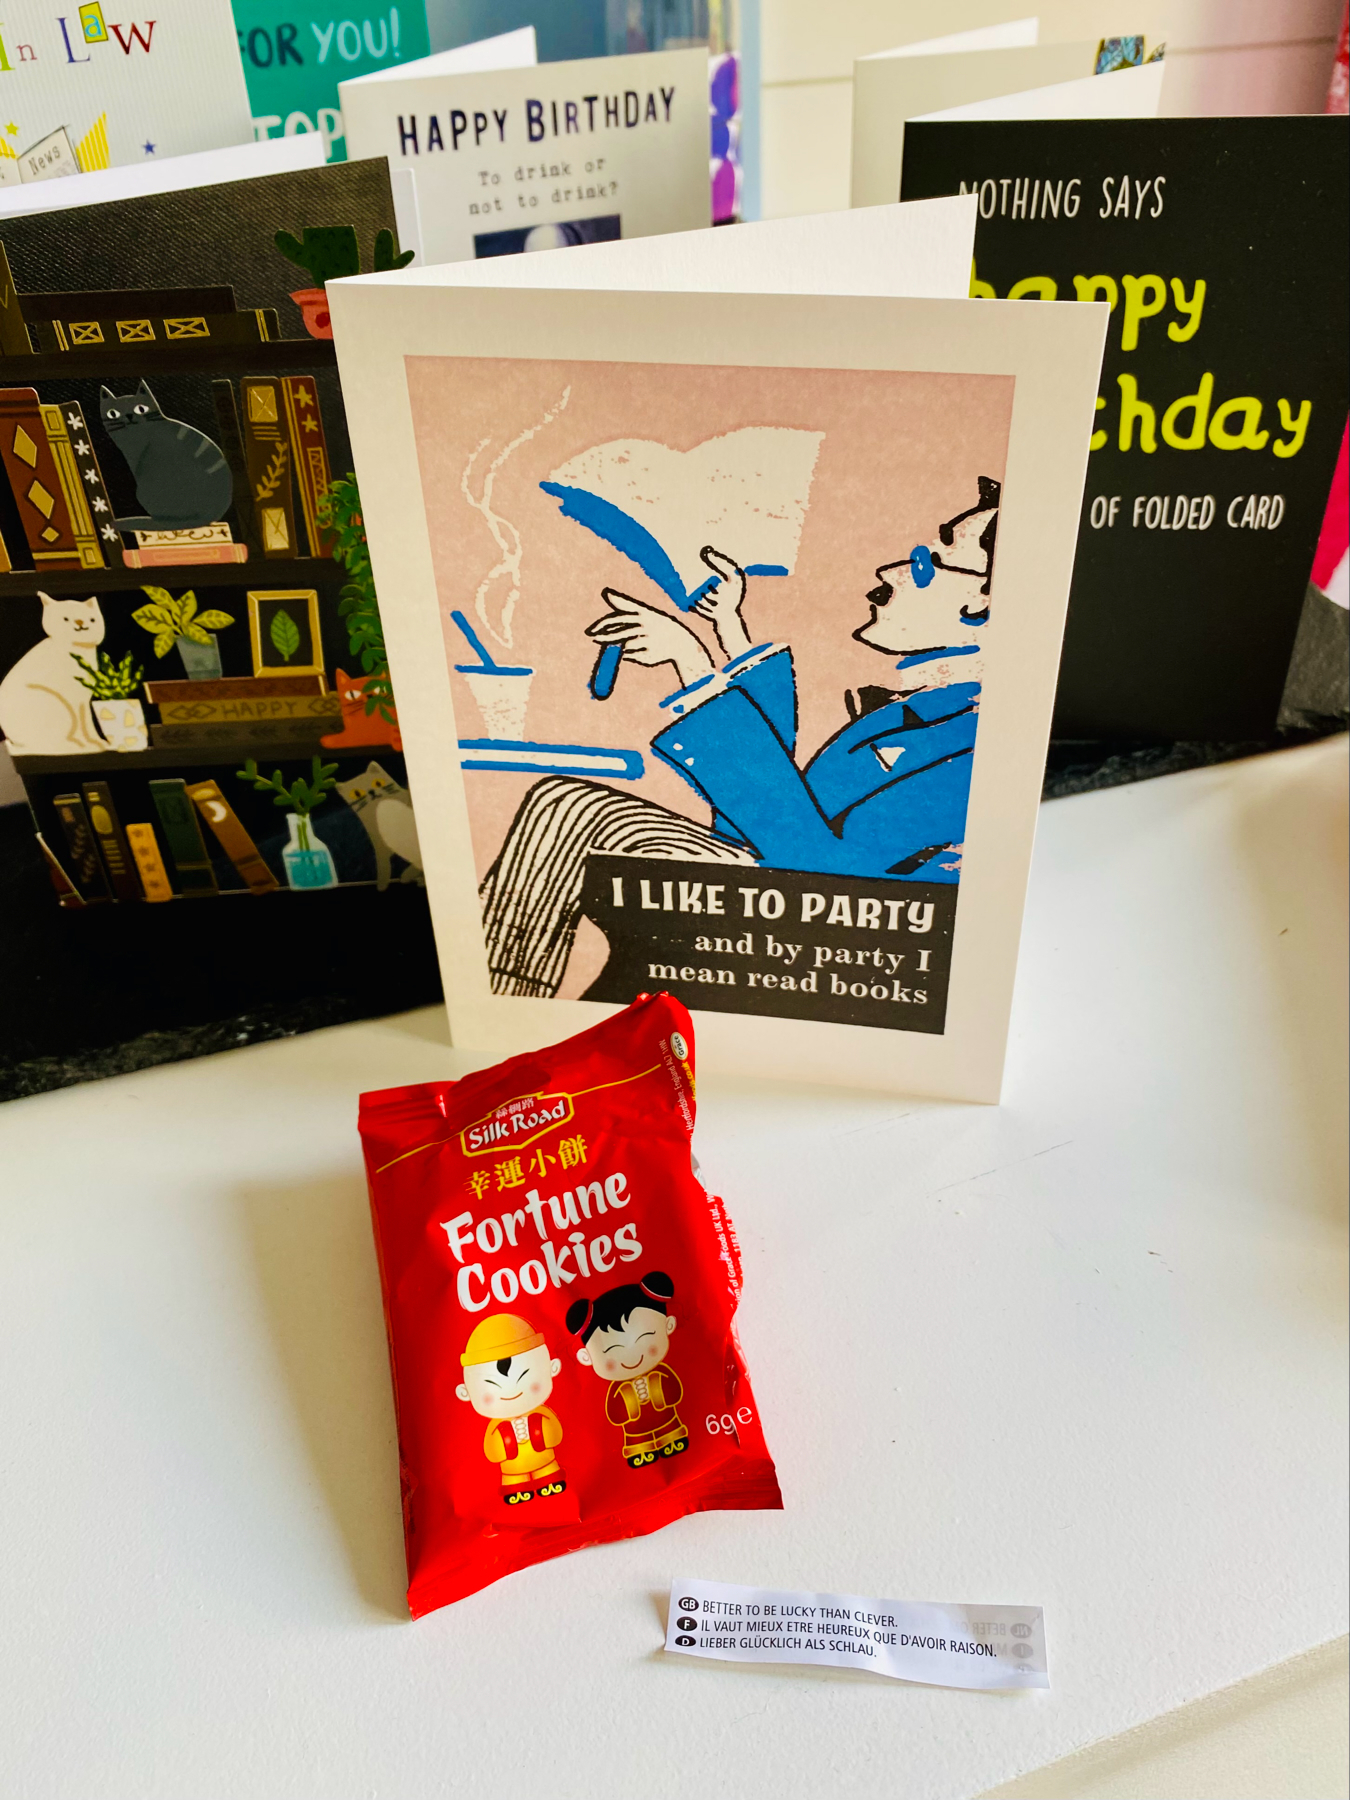 A collection of birthday greeting cards displayed on a surface, one featuring an illustration of a person reading with the phrase I like to party and by party I mean read books. In front of the cards, there's a fortune cookie wrapper